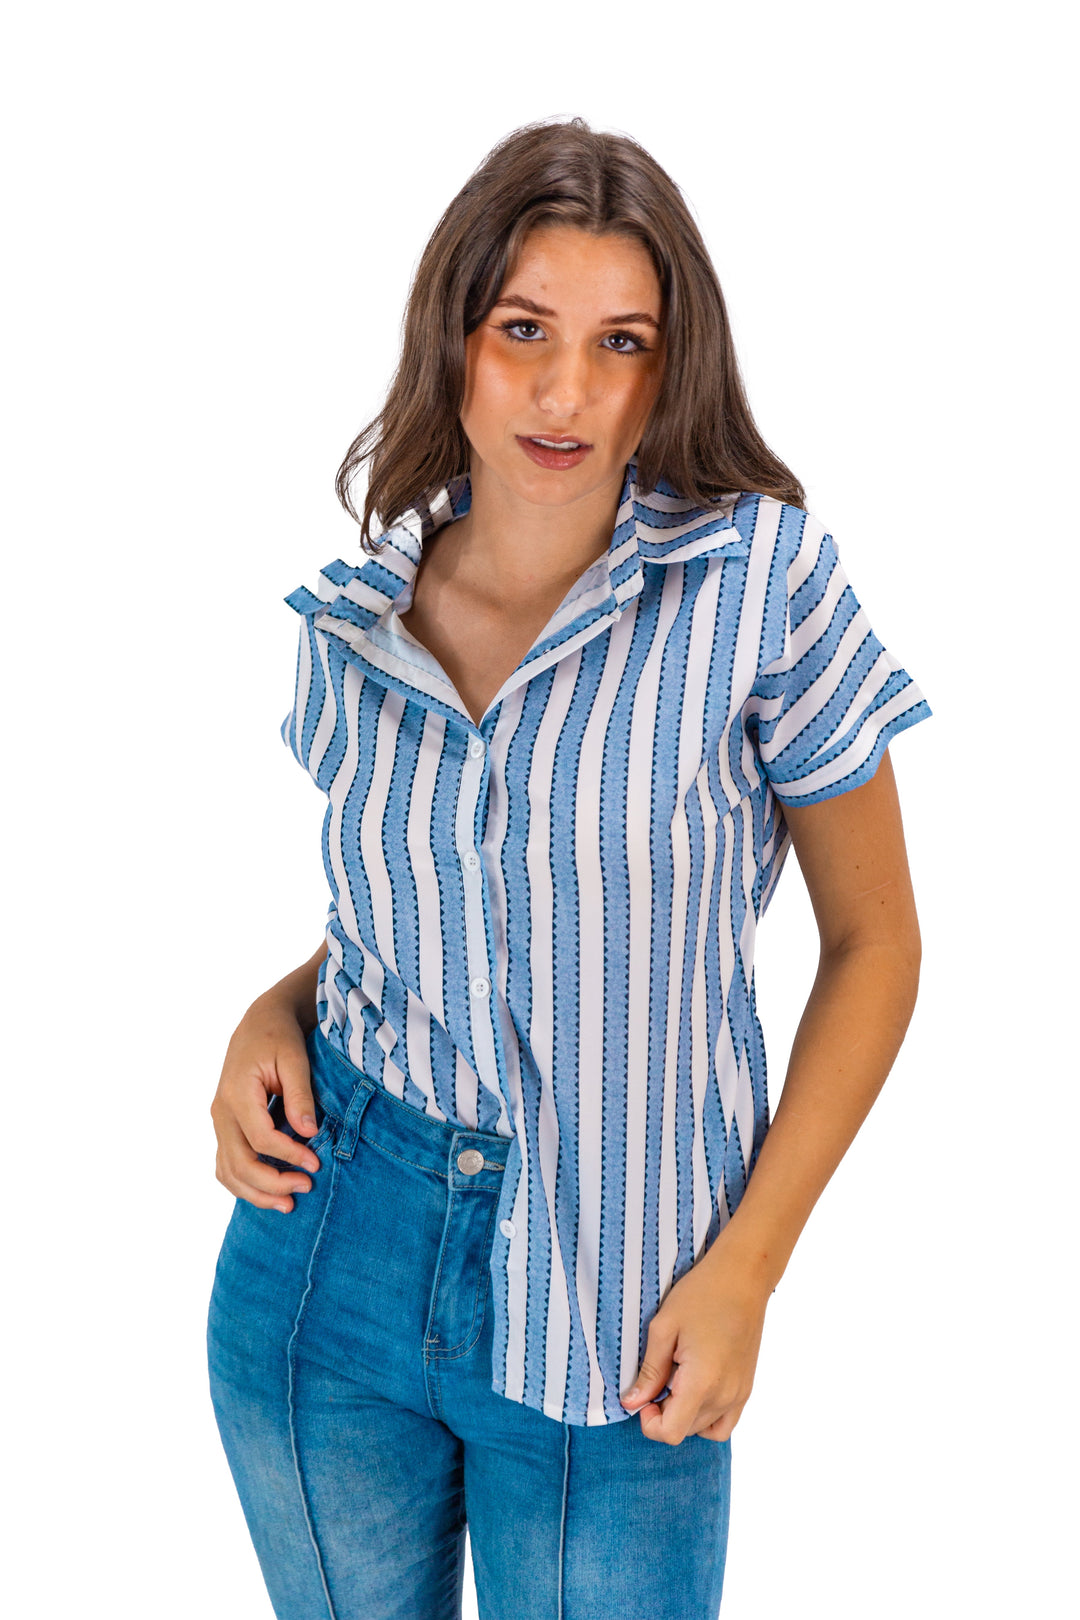 Chic woman in Fabonics Coastal Breeze Blue Striped Button-Down Blouse, embodying casual summer elegance.